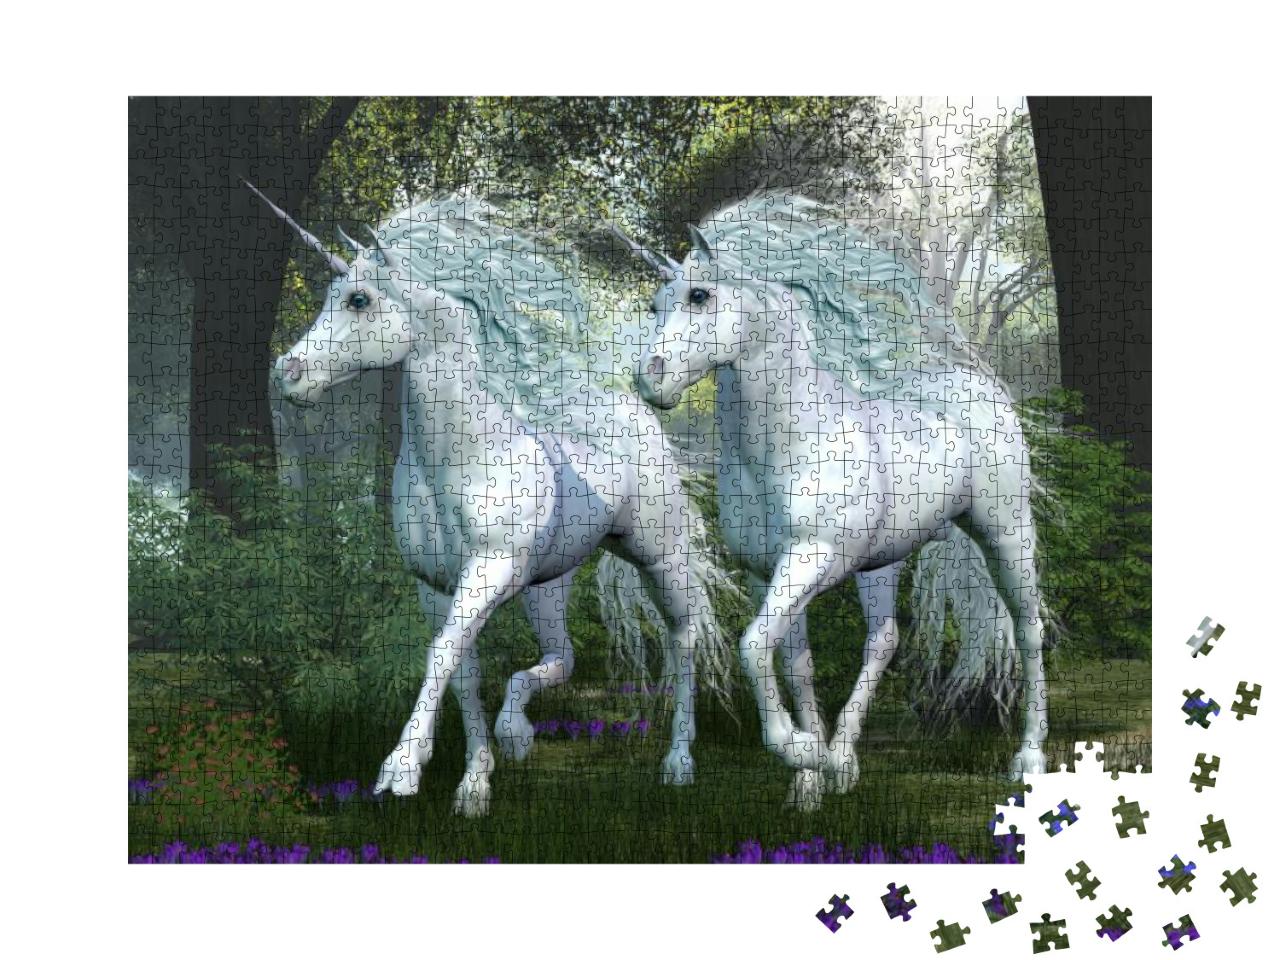 Unicorn Elm Forest - Two White Unicorns Prance Through an... Jigsaw Puzzle with 1000 pieces